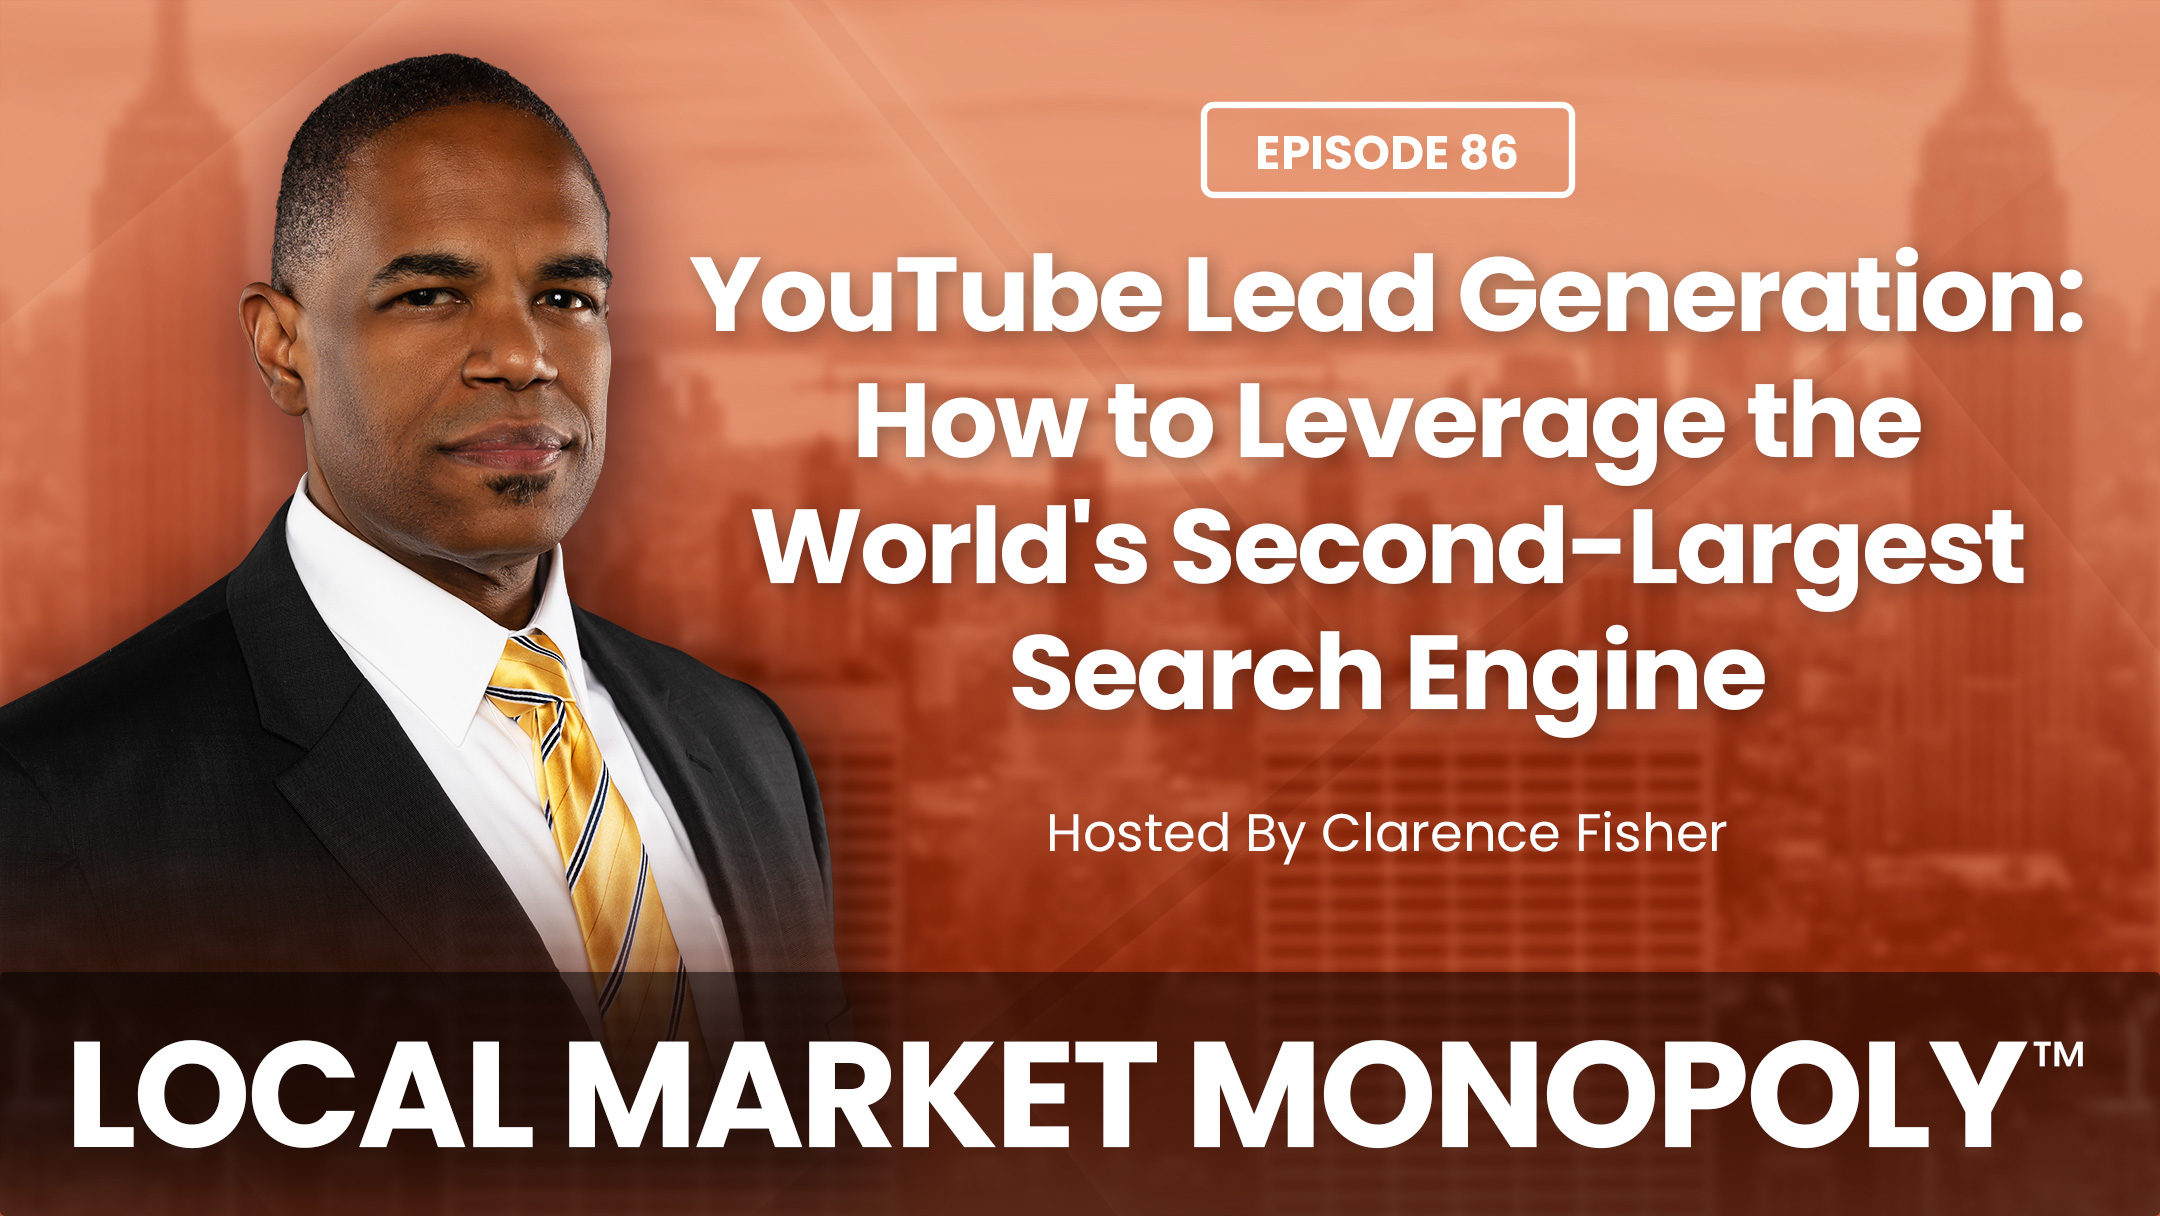 YouTube Lead Generation: How to Leverage the World's Second Largest Search Engine